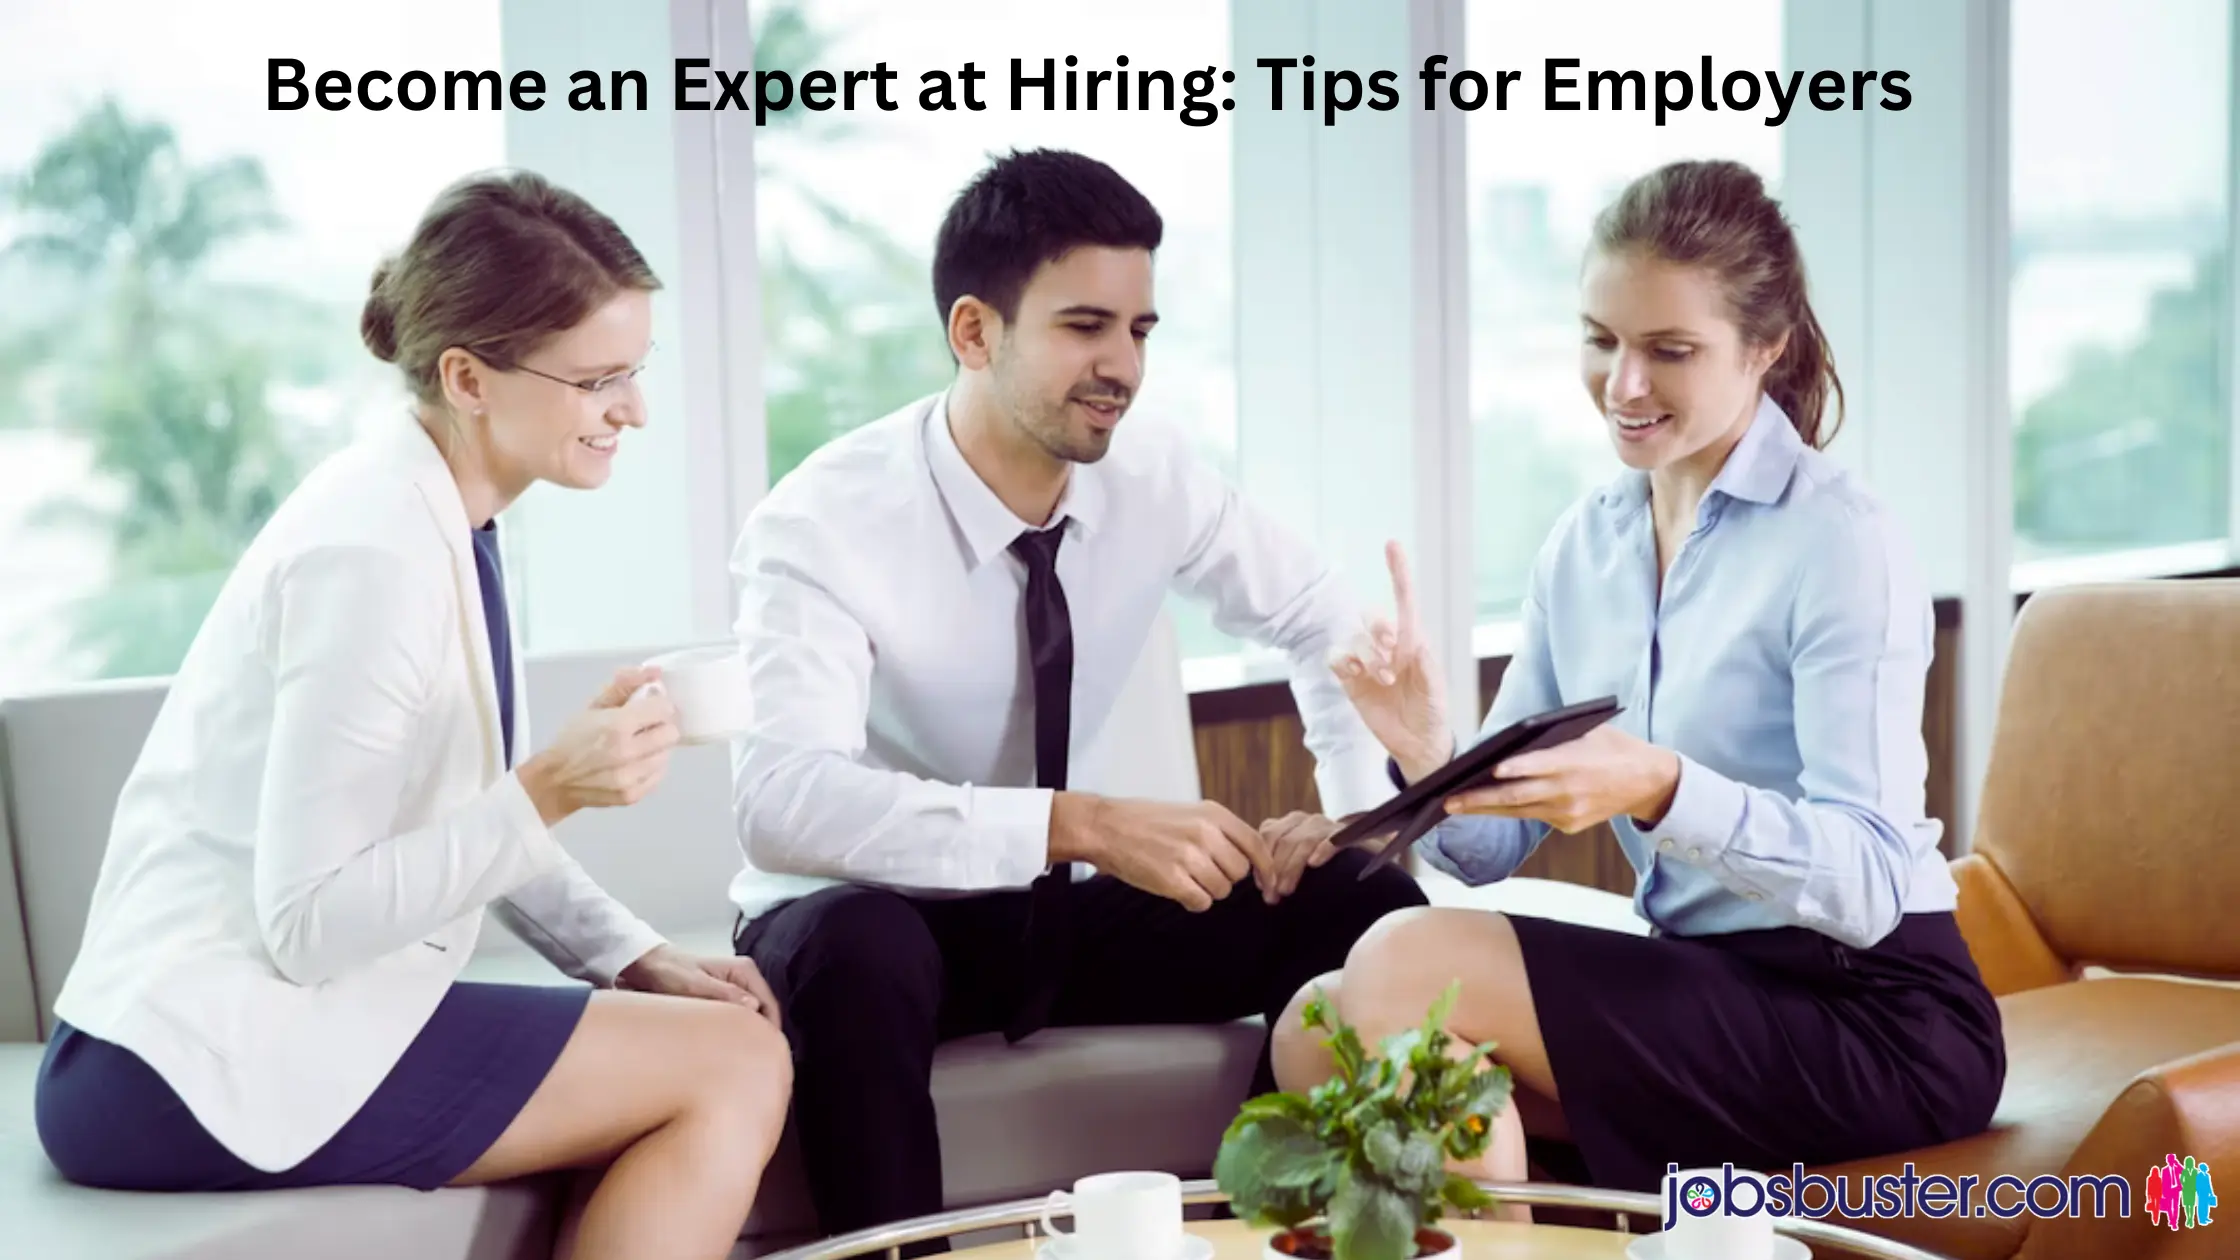 Become an Expert at Hiring: Tips for Employers